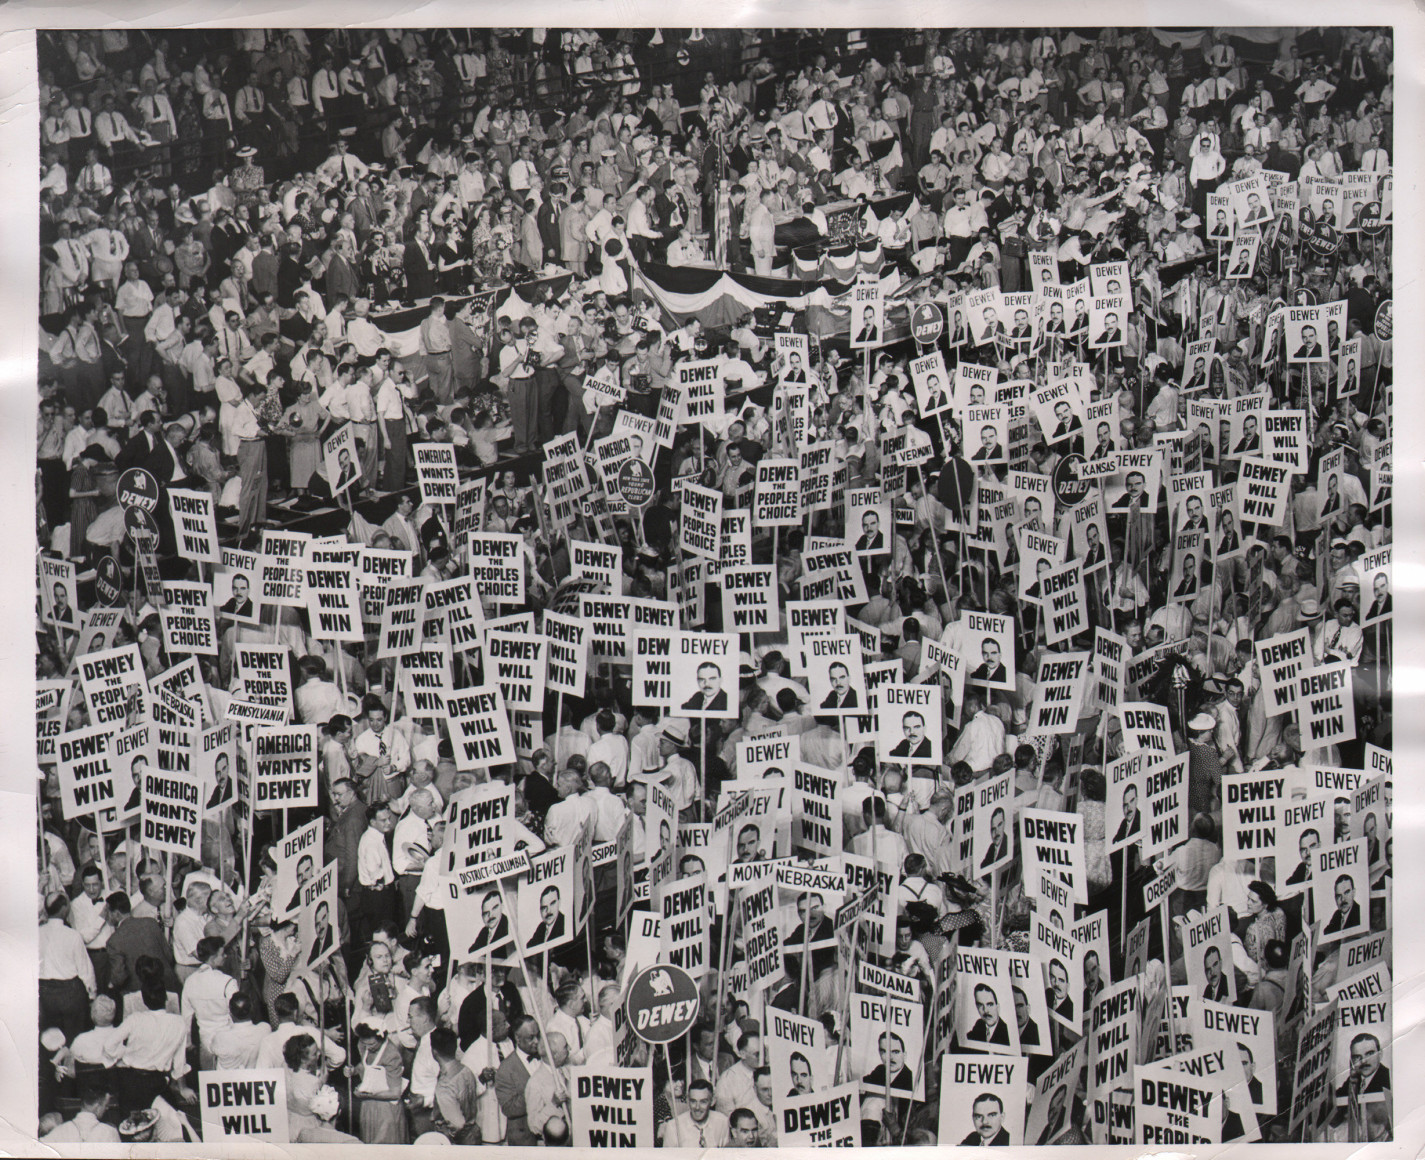 39. United Press, Every Fourth Year..., ​May 30, 1952. Large crowd photographed from above holding signs reading &quot;Dewey,&quot; &quot;Dewey will win,&quot; and &quot;Dewey the people's choice&quot;